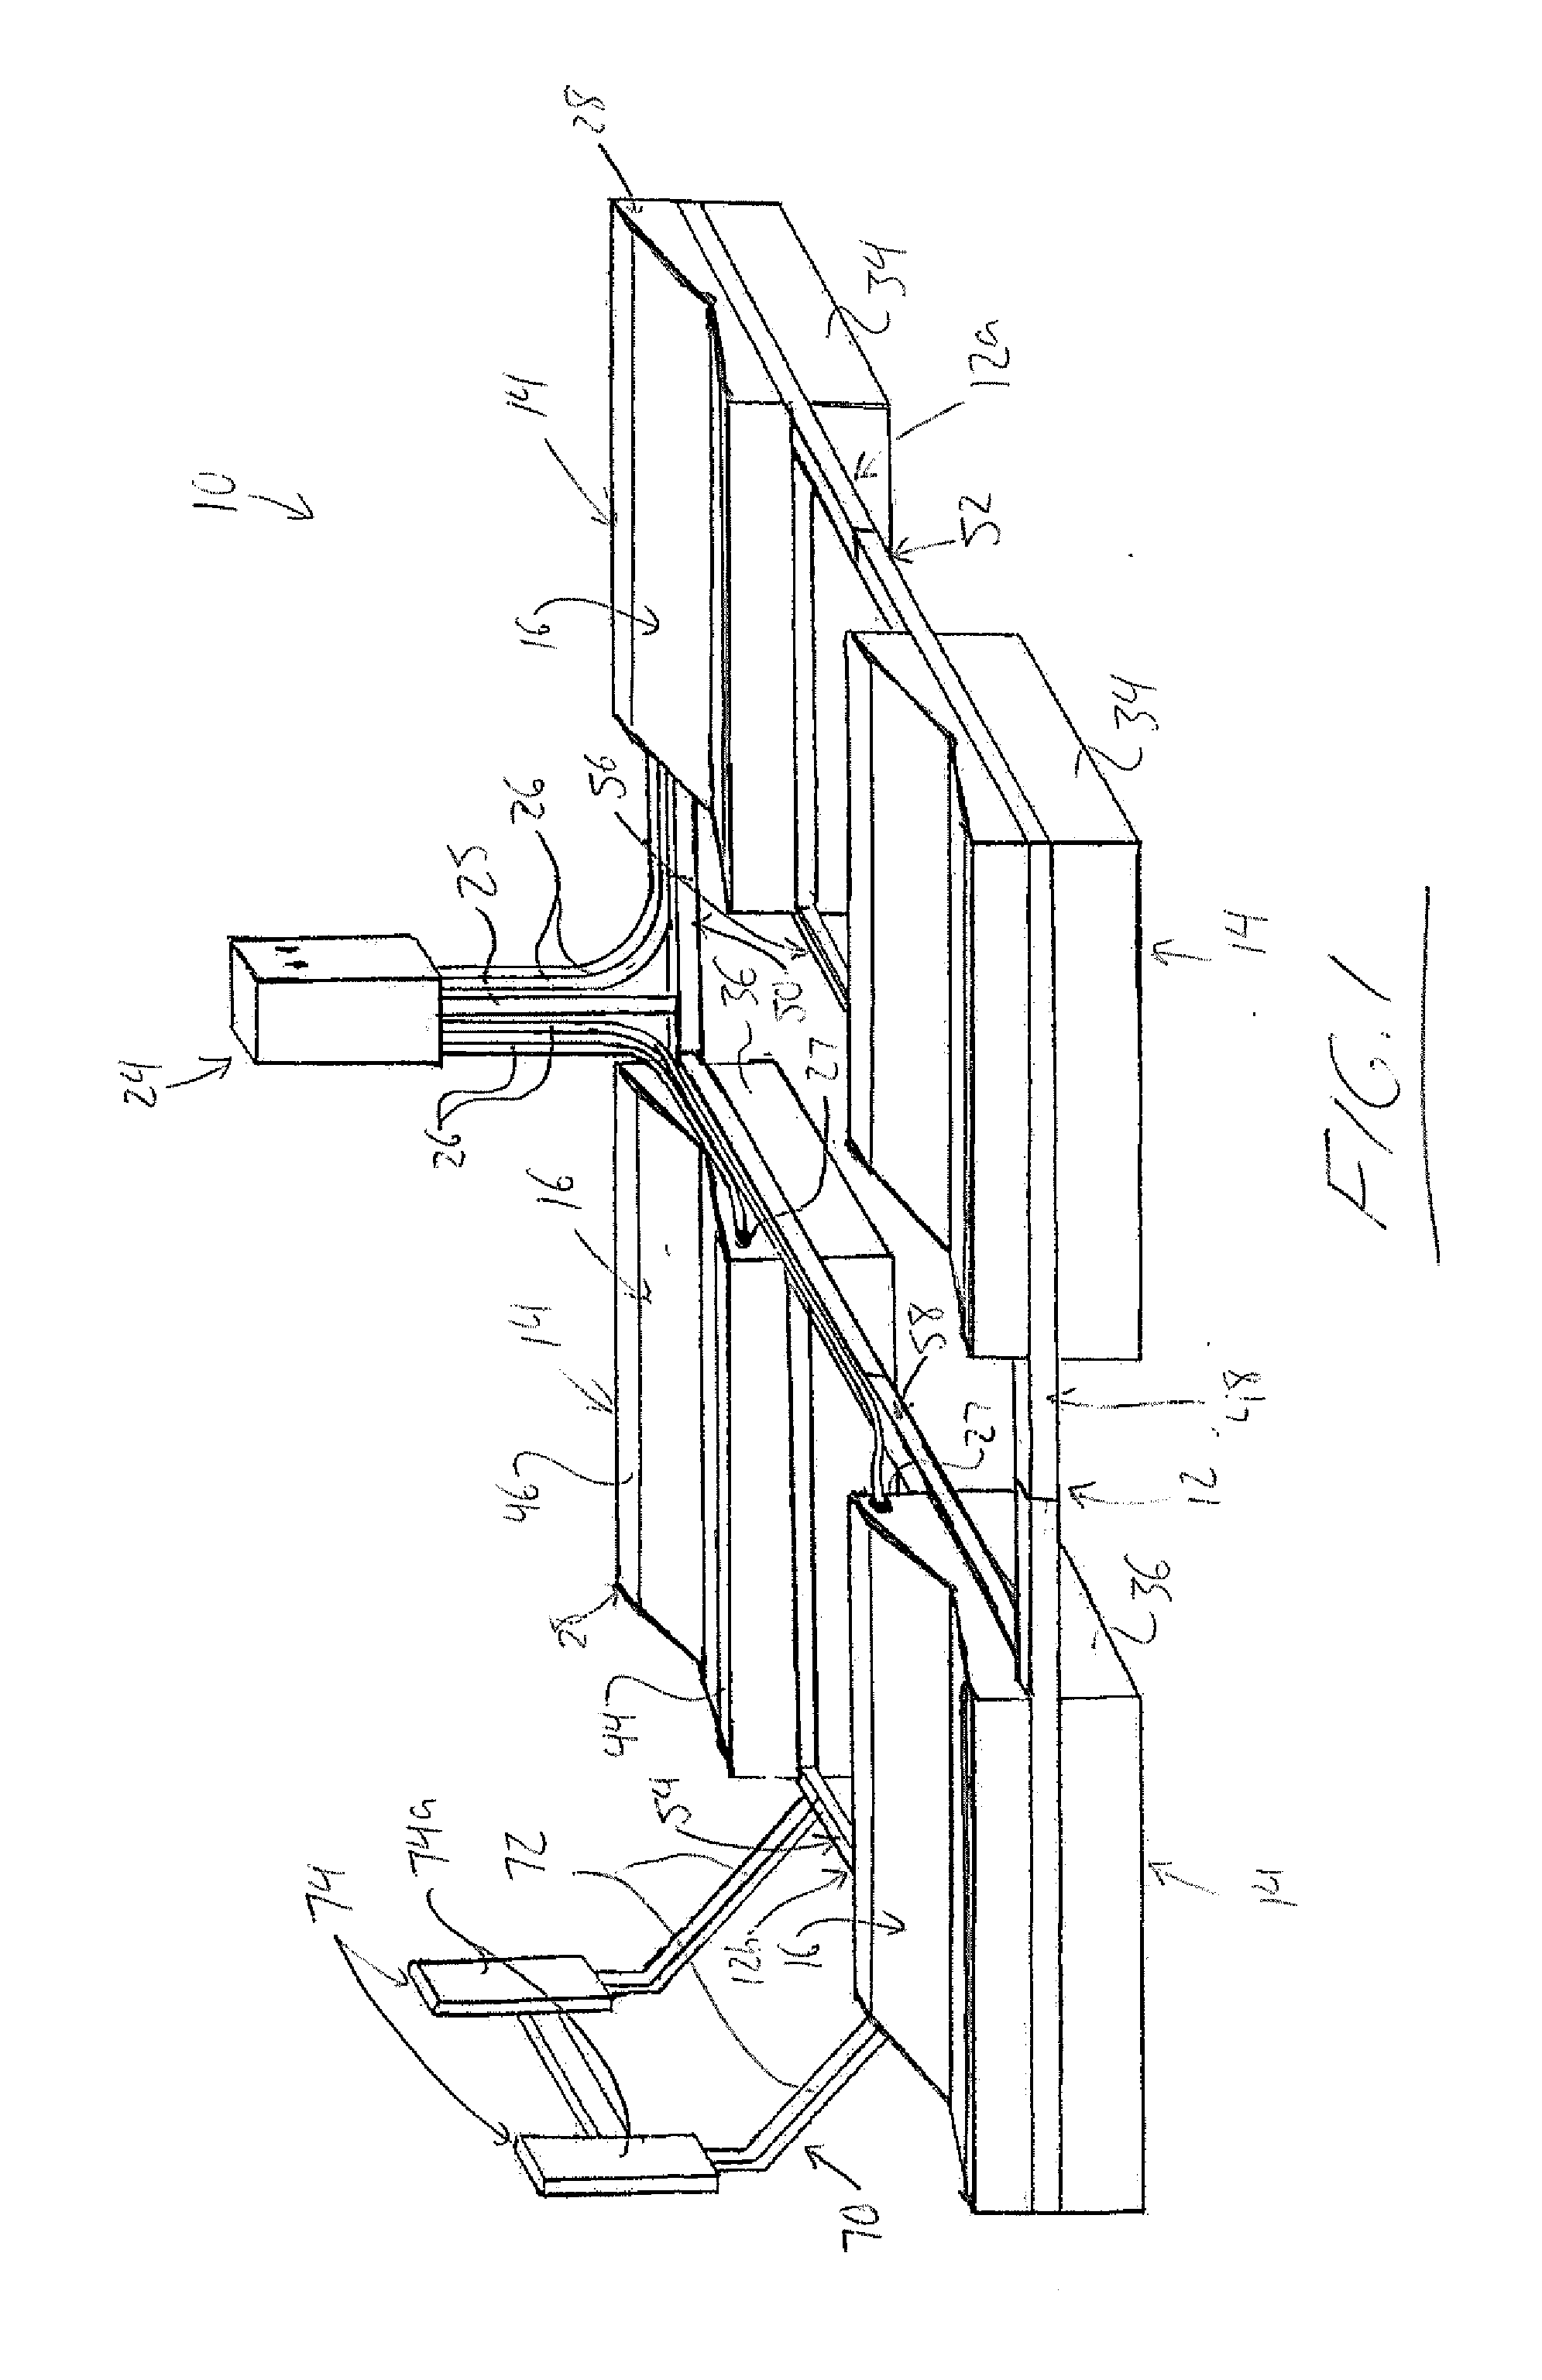 Pneumatic Boat Lift with Boat-Carrying and Boat-Guiding Air Tanks